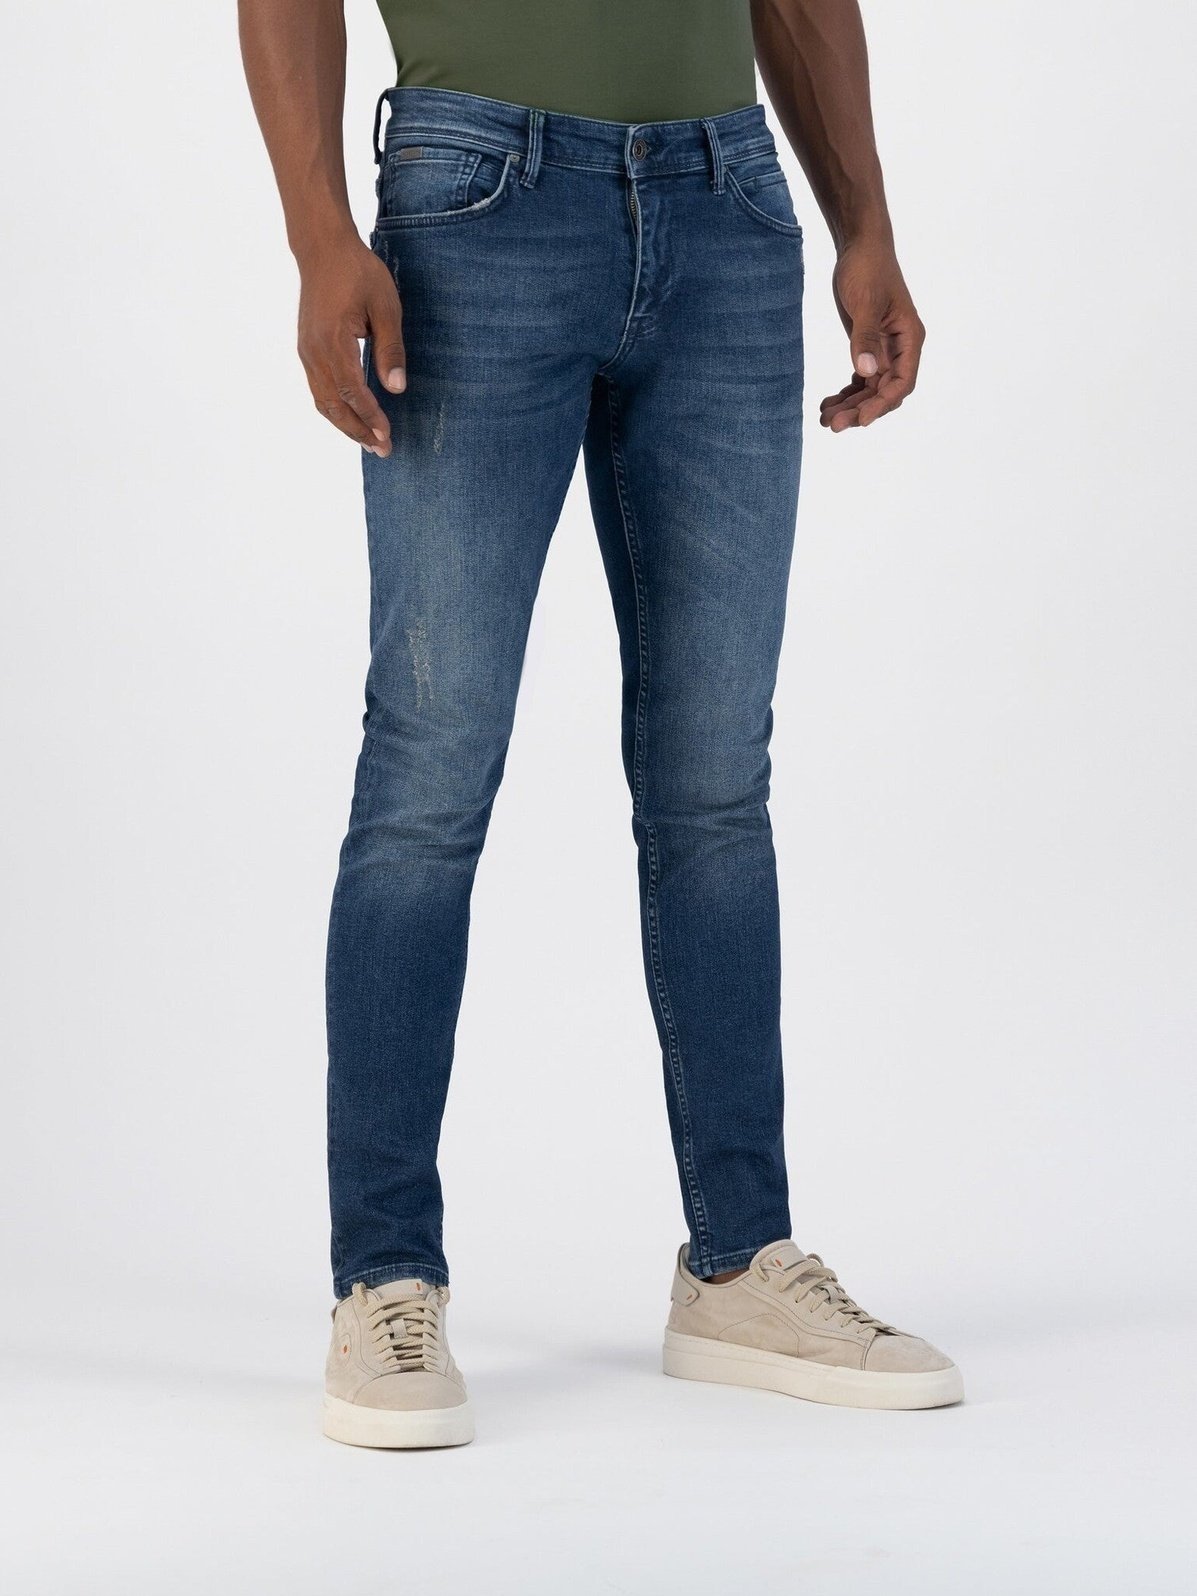 Skinny fit jeans with abrassions at pocket end